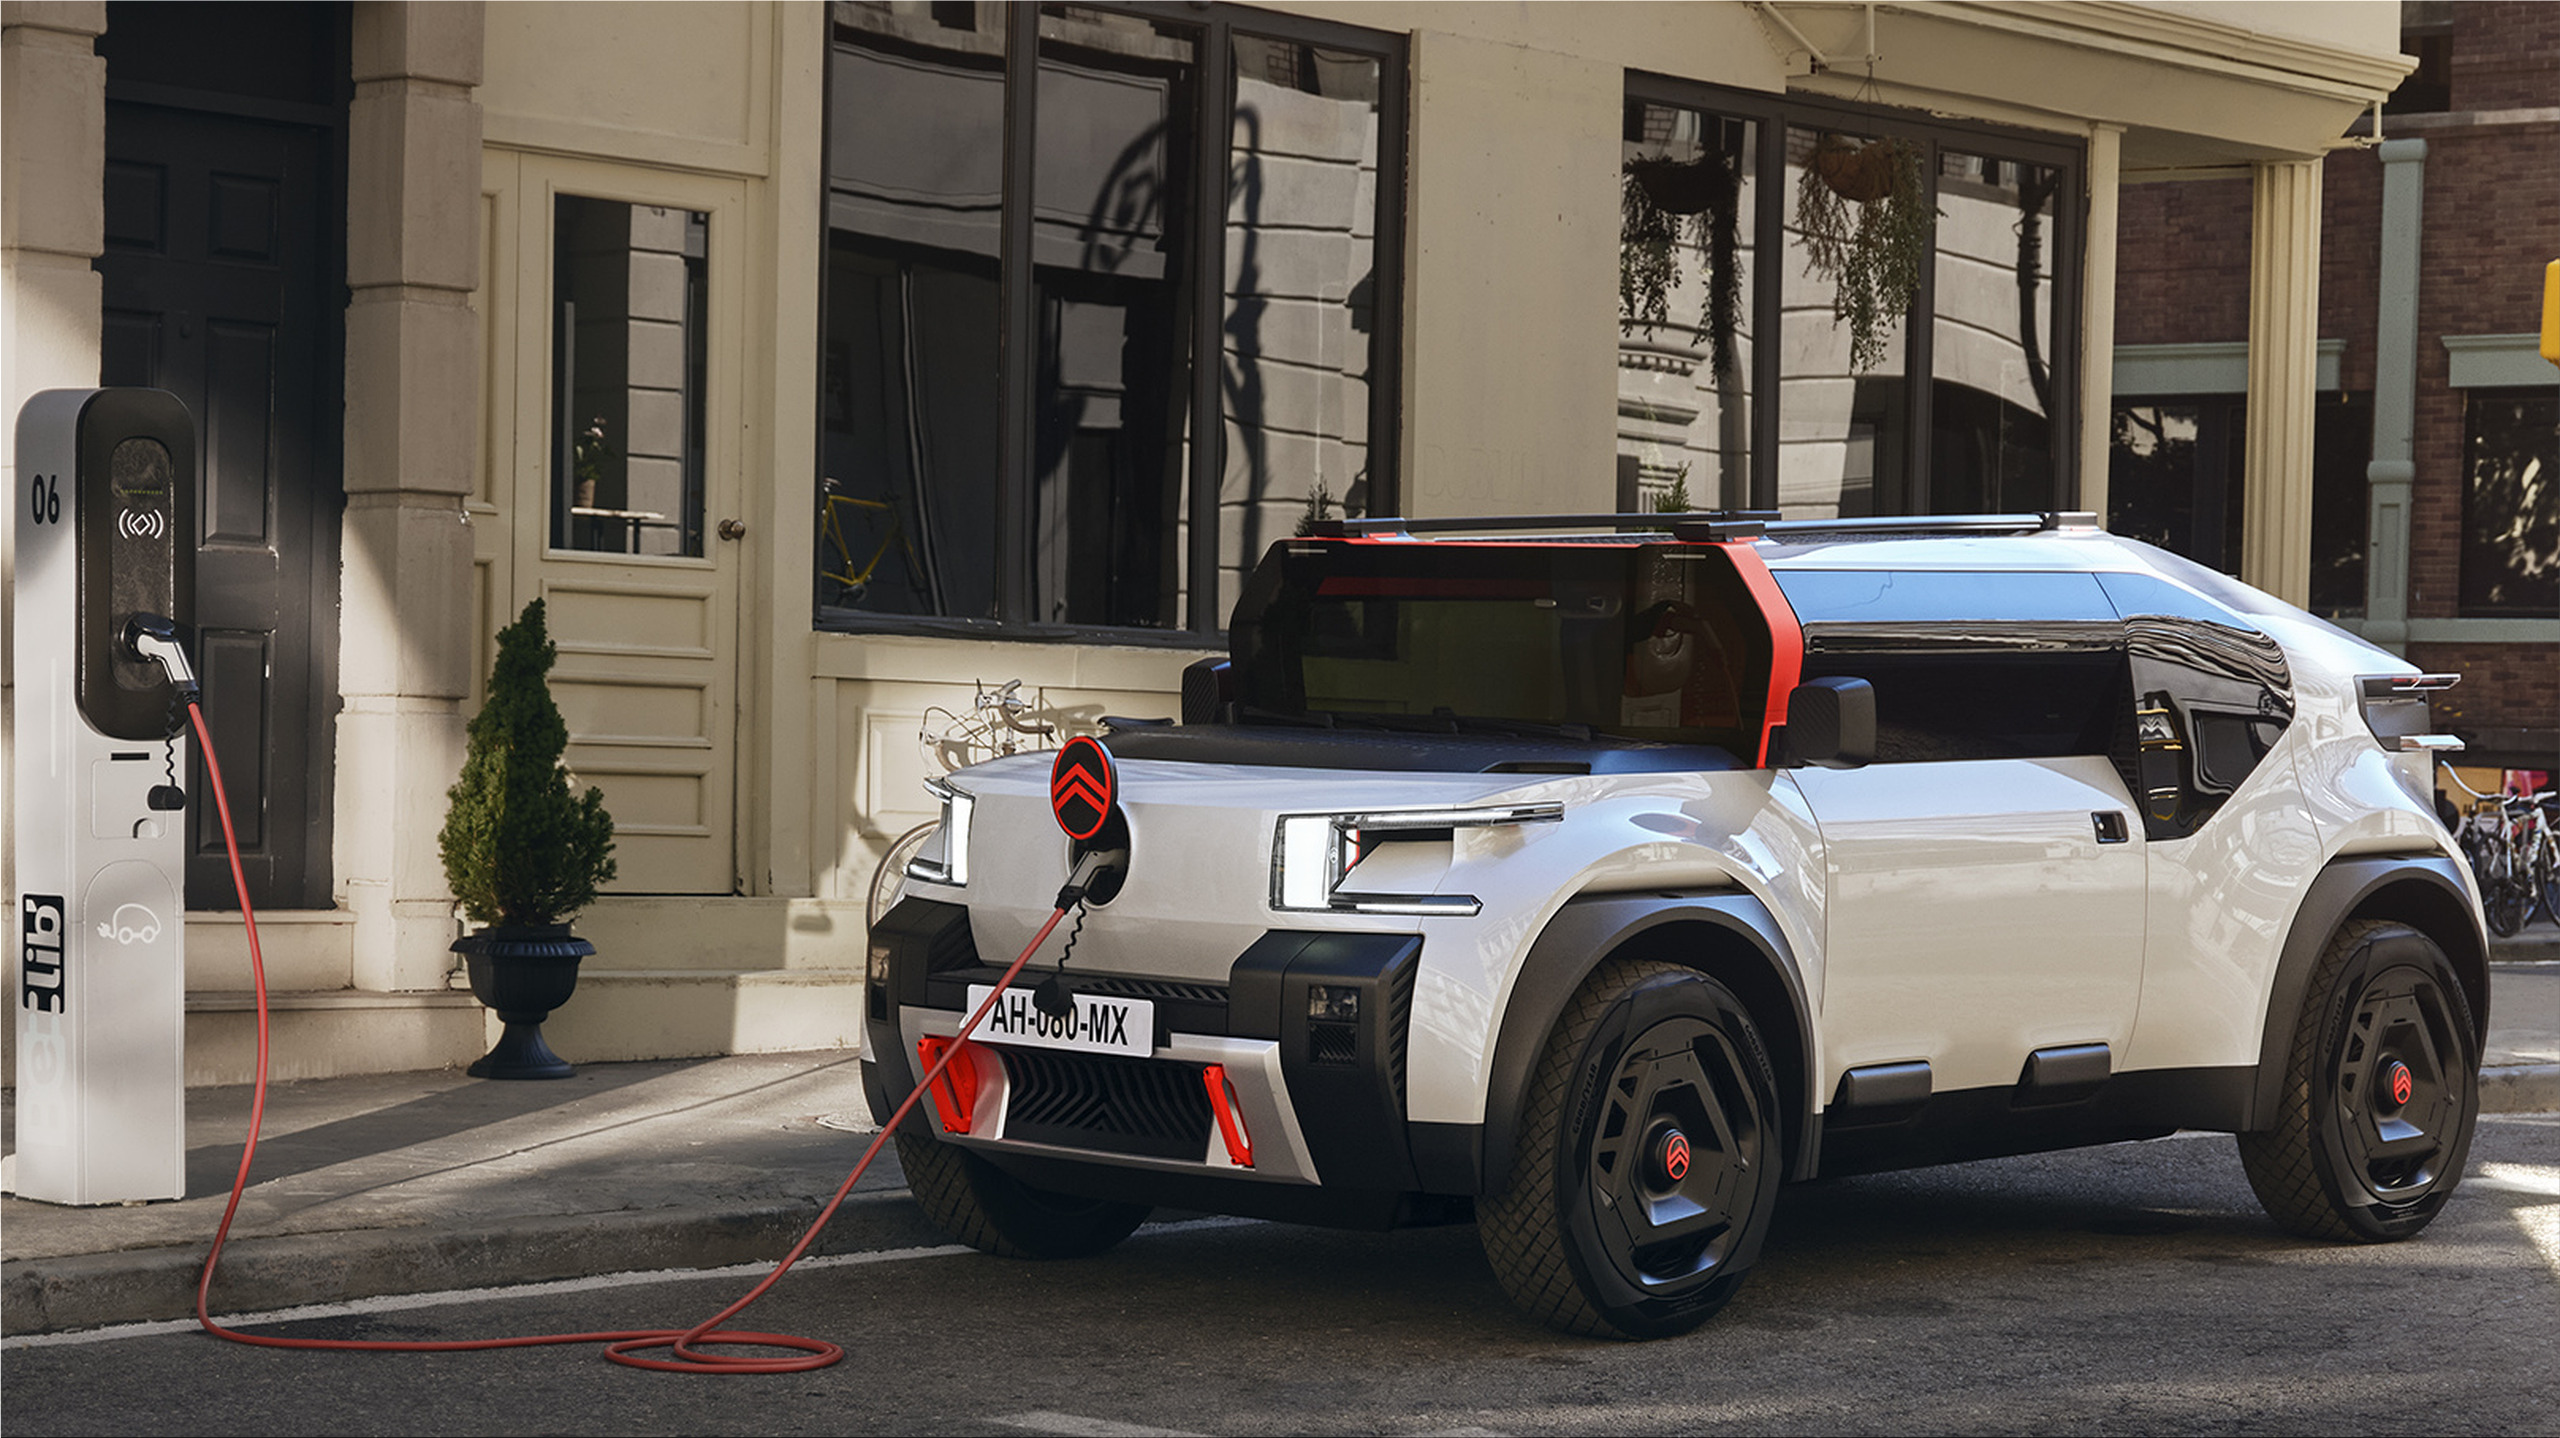 The new Citroen Oli family electric car is practical, efficient, and affordable